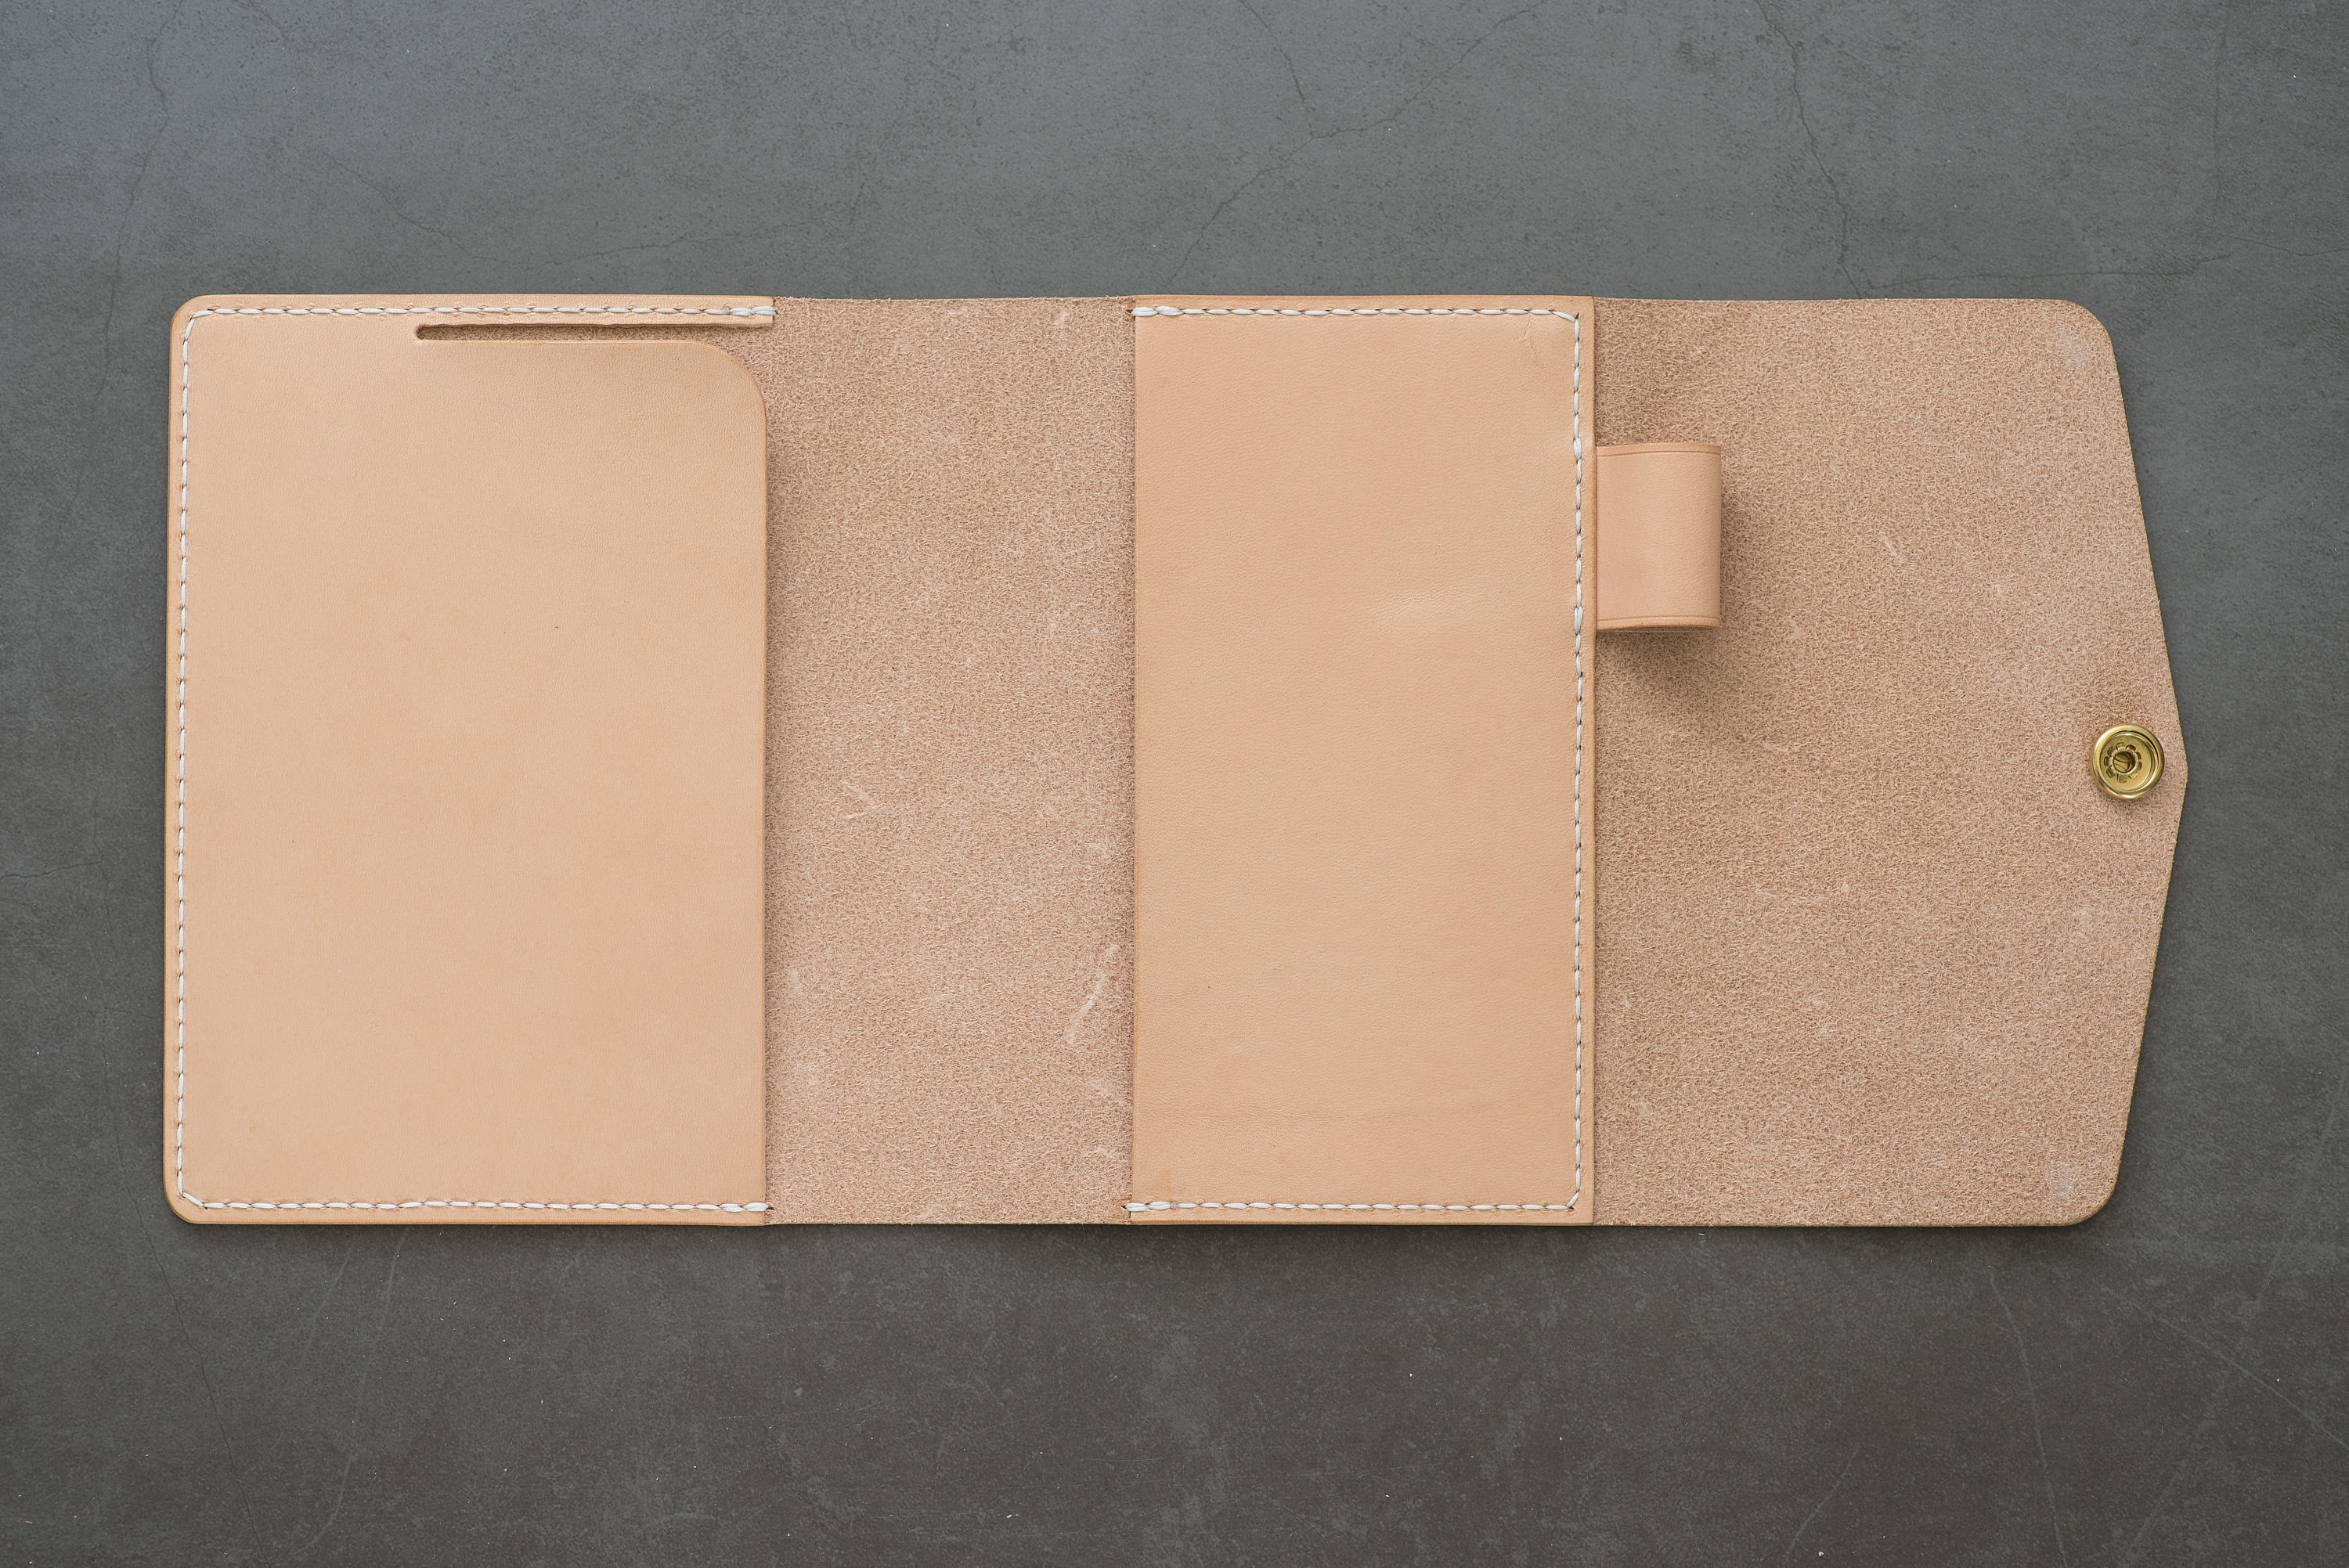 A6/Hobonichi/Midori MD Natural Trifold Leather Notebook Cover | Etsy